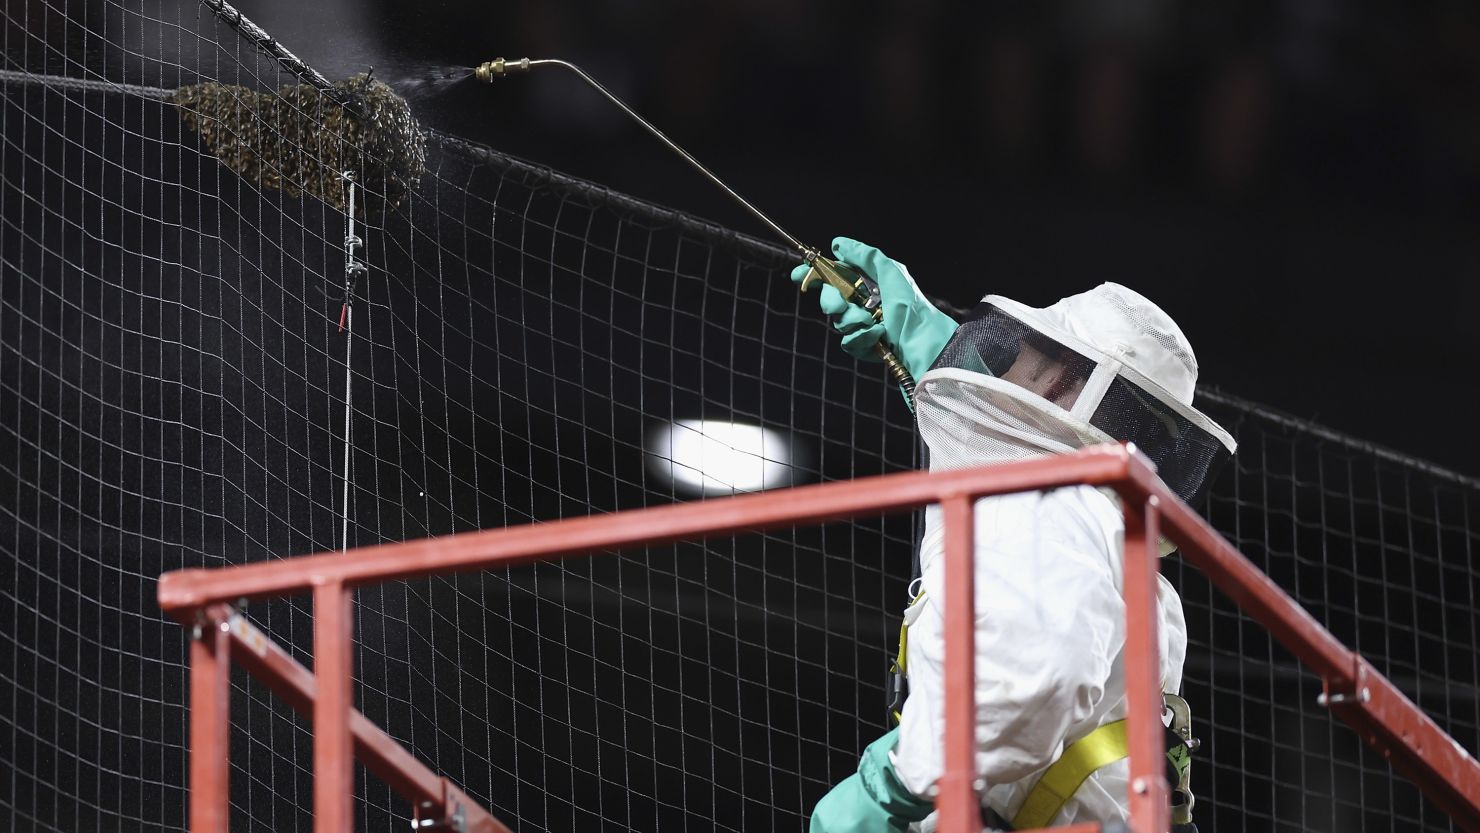 Beekeeper Matt Hilton removes a colony of bees that formed on the net behind home plate during a delay to the MLB game between the Los Angeles Dodgers and the Arizona Diamondbacks at Chase Field.